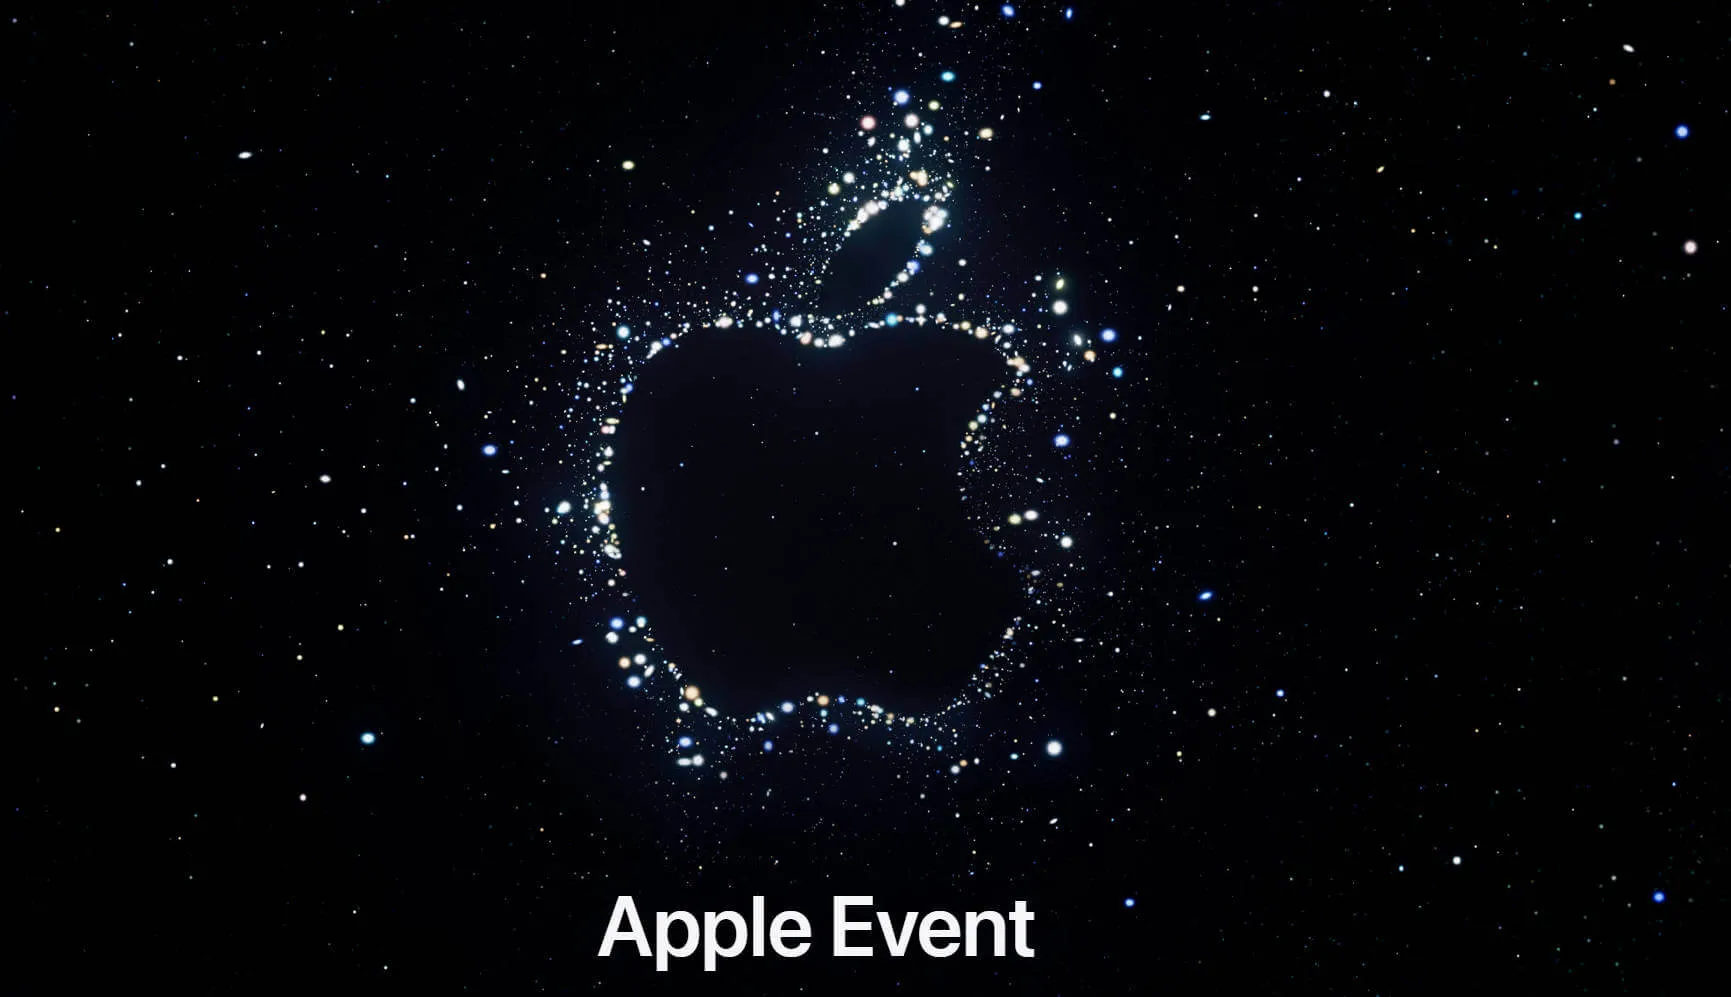 Apple events